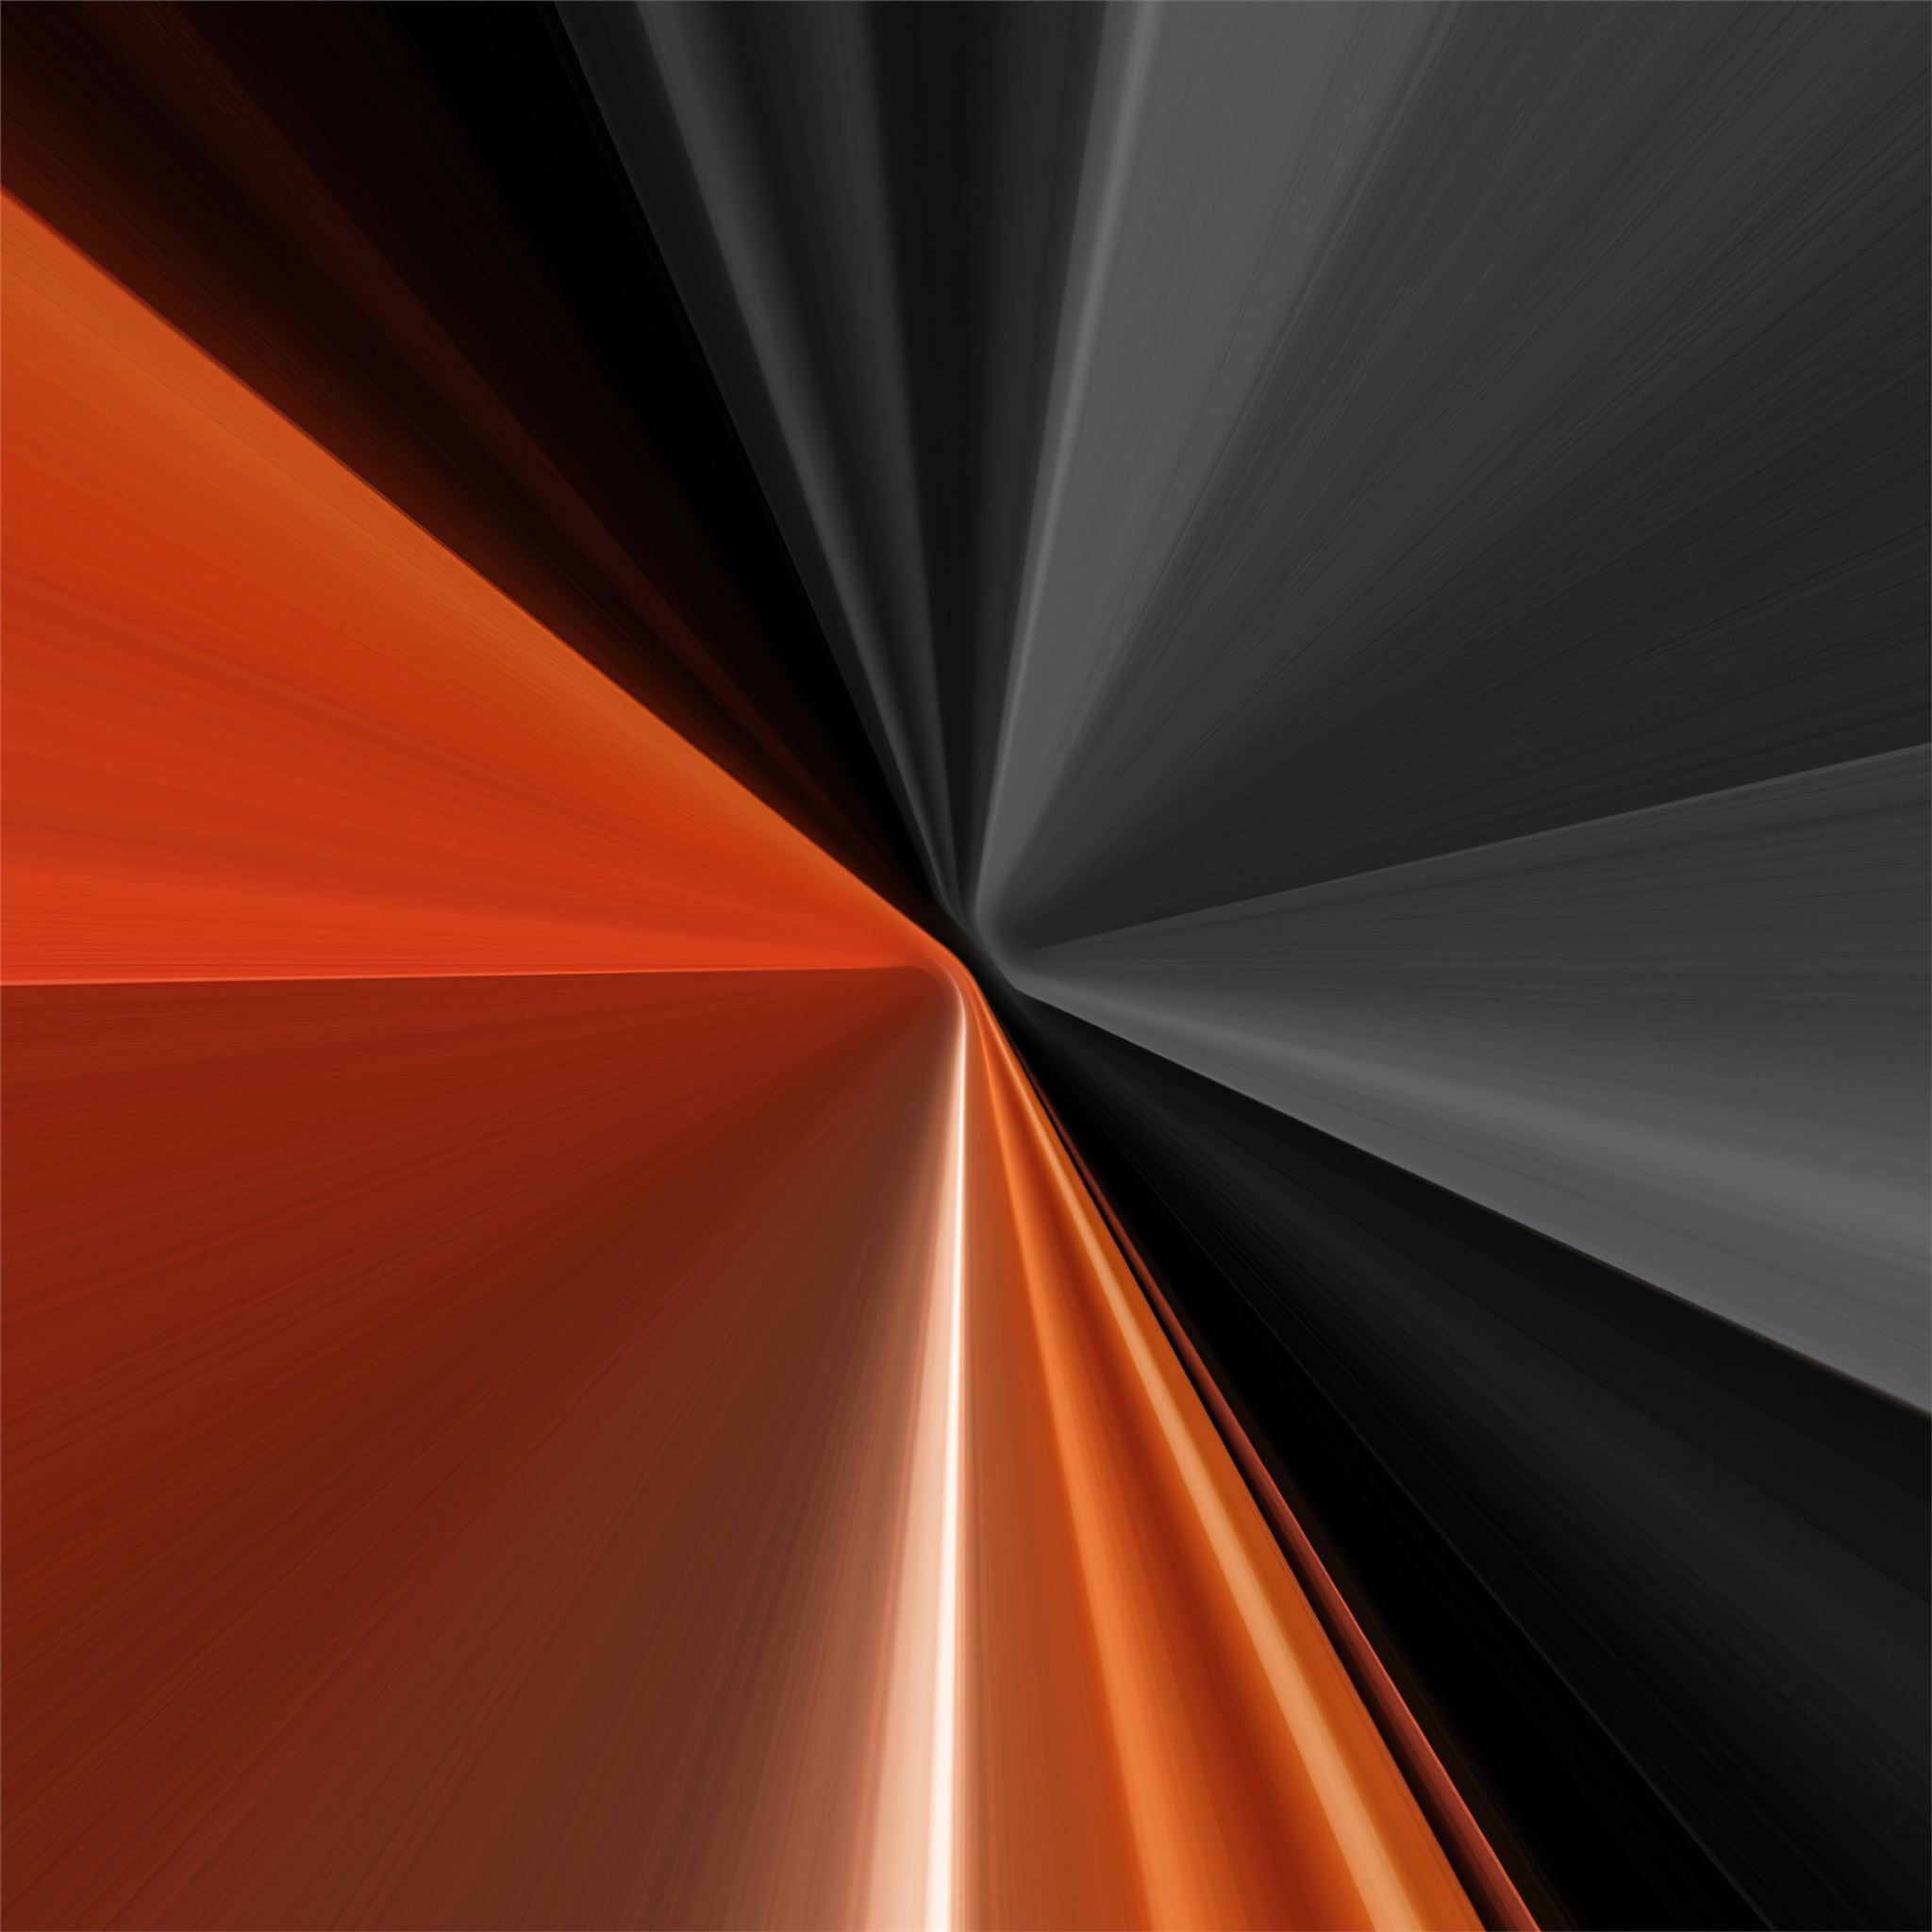 Orange ipad, ipad 2, ipad mini for parallax wallpapers hd, desktop  backgrounds 1280x1280 downloads, images and pictures